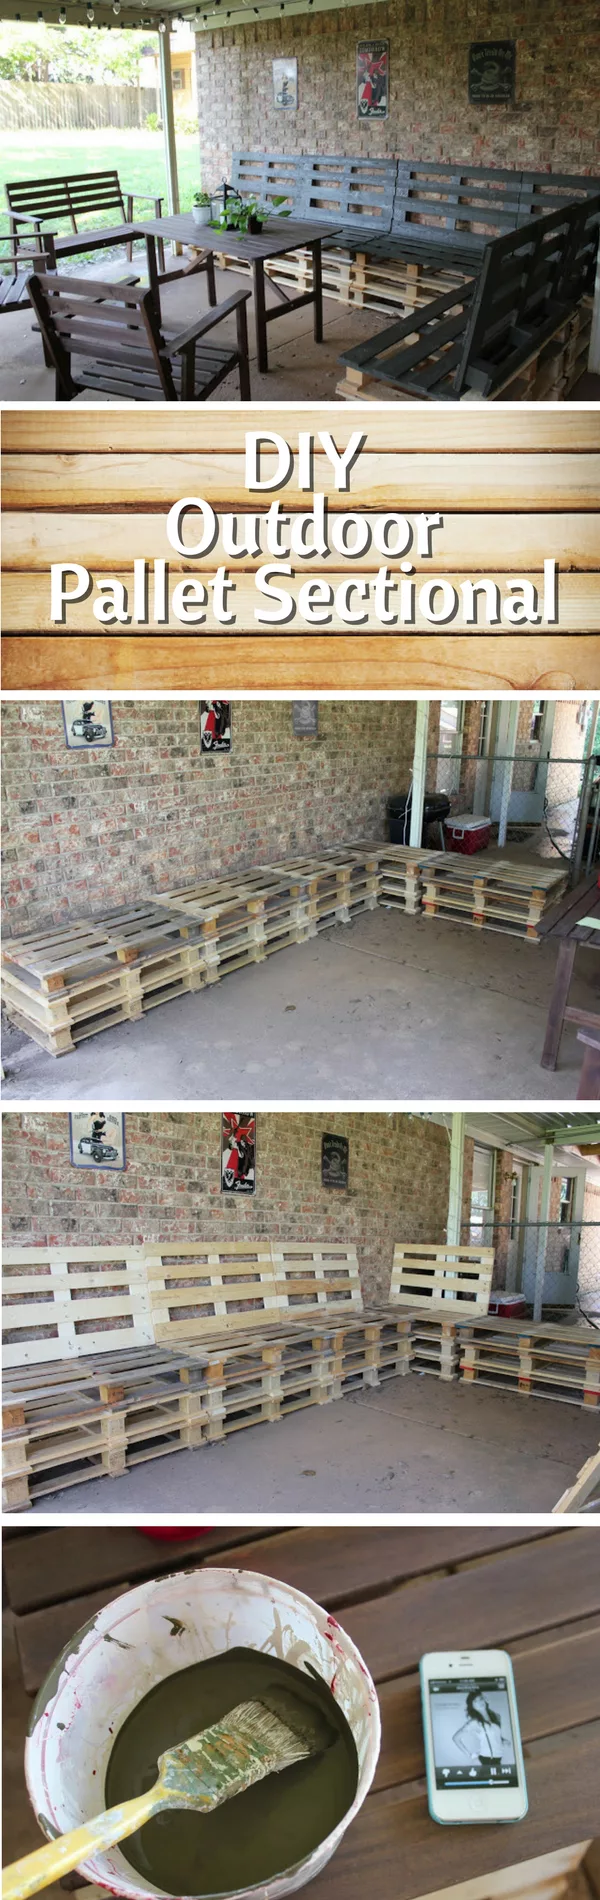 Check out how to build DIY outdoor furniture from pallet wood